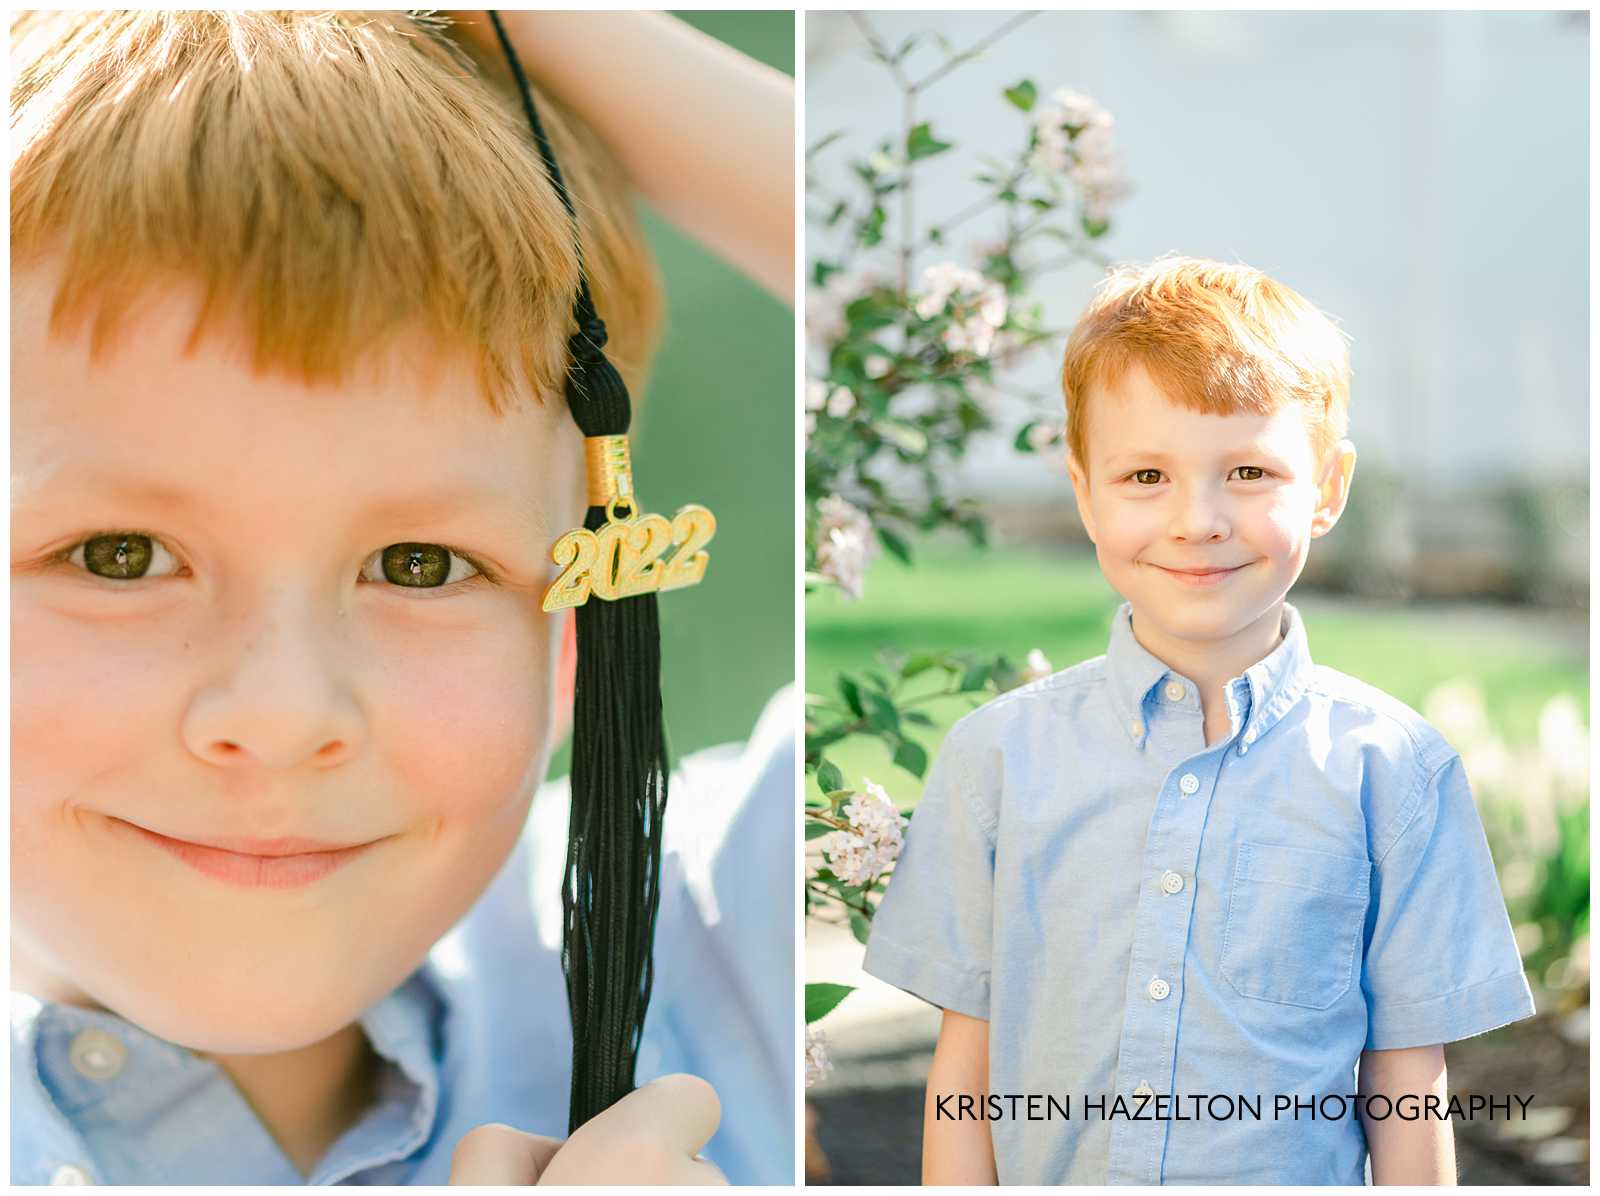 Young boy holding up a graduation tassel next to his eye that reads 2022.